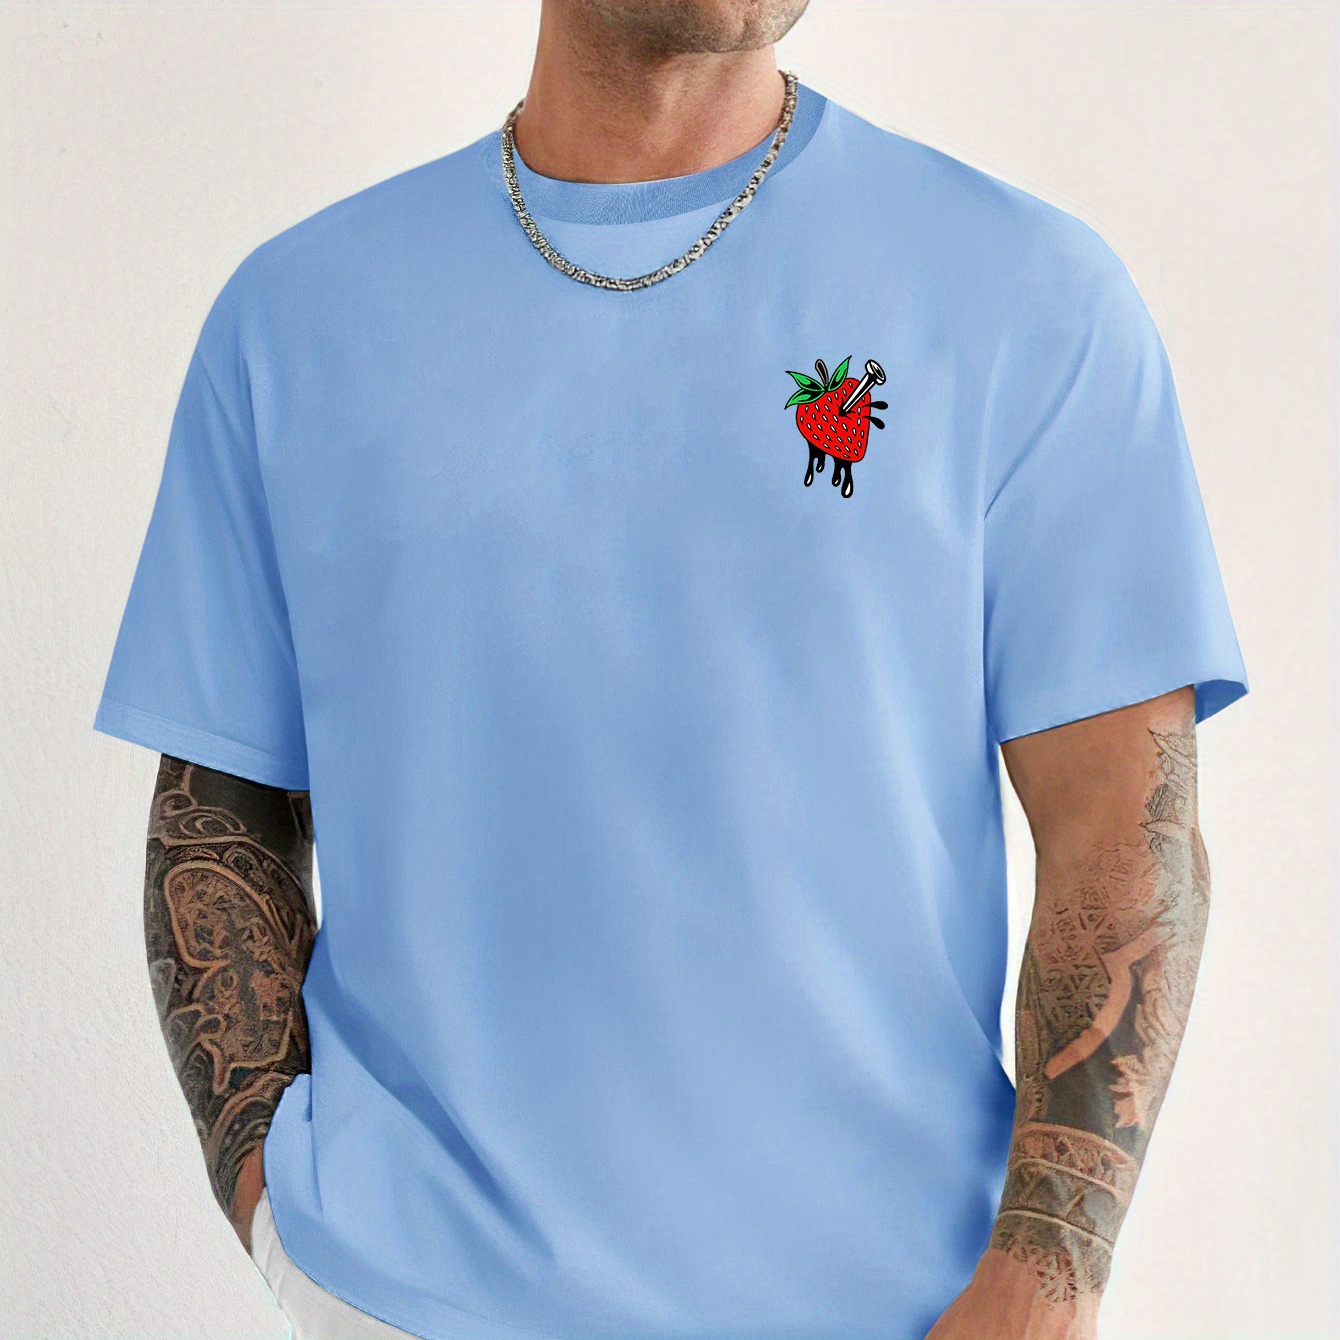 

Men's T-shirt, Strawberry Graphic Print Short Sleeve Crew Neck Tees For Summer, Casual Outdoor Comfy Clothing For Male